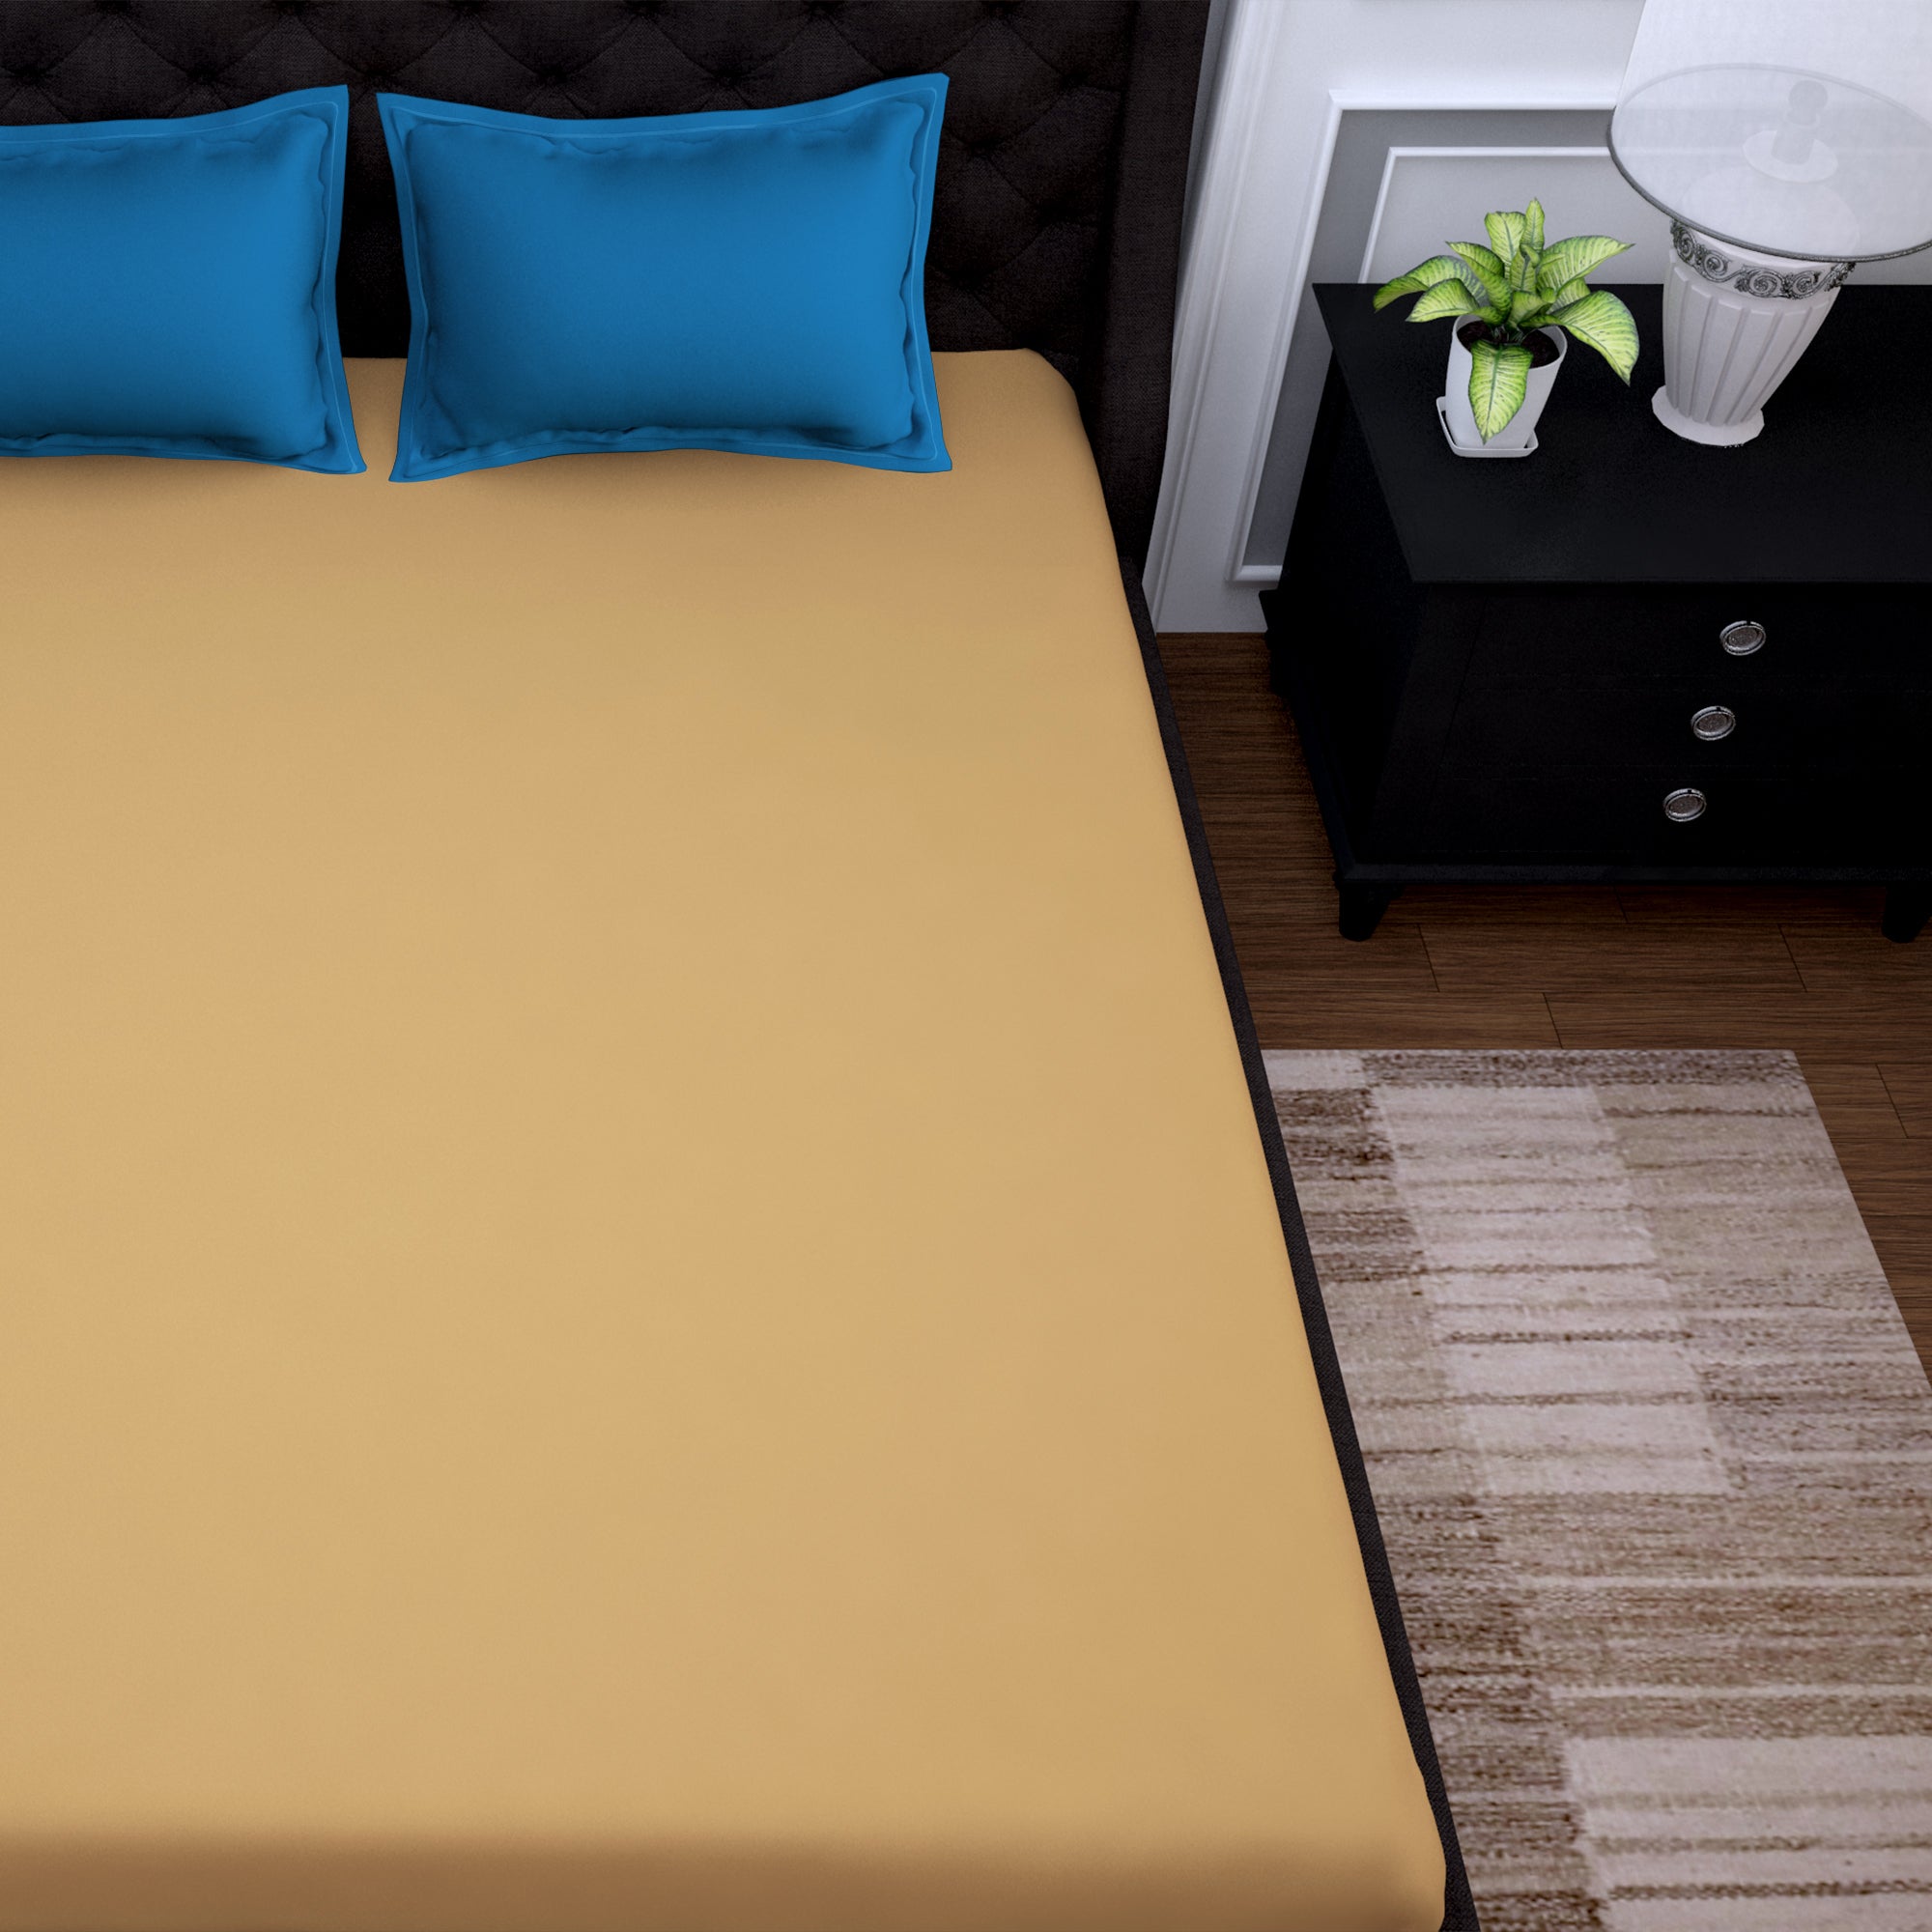 PAVO Tranquil Solid Luxurious King Bedsheet - Beige and Blue